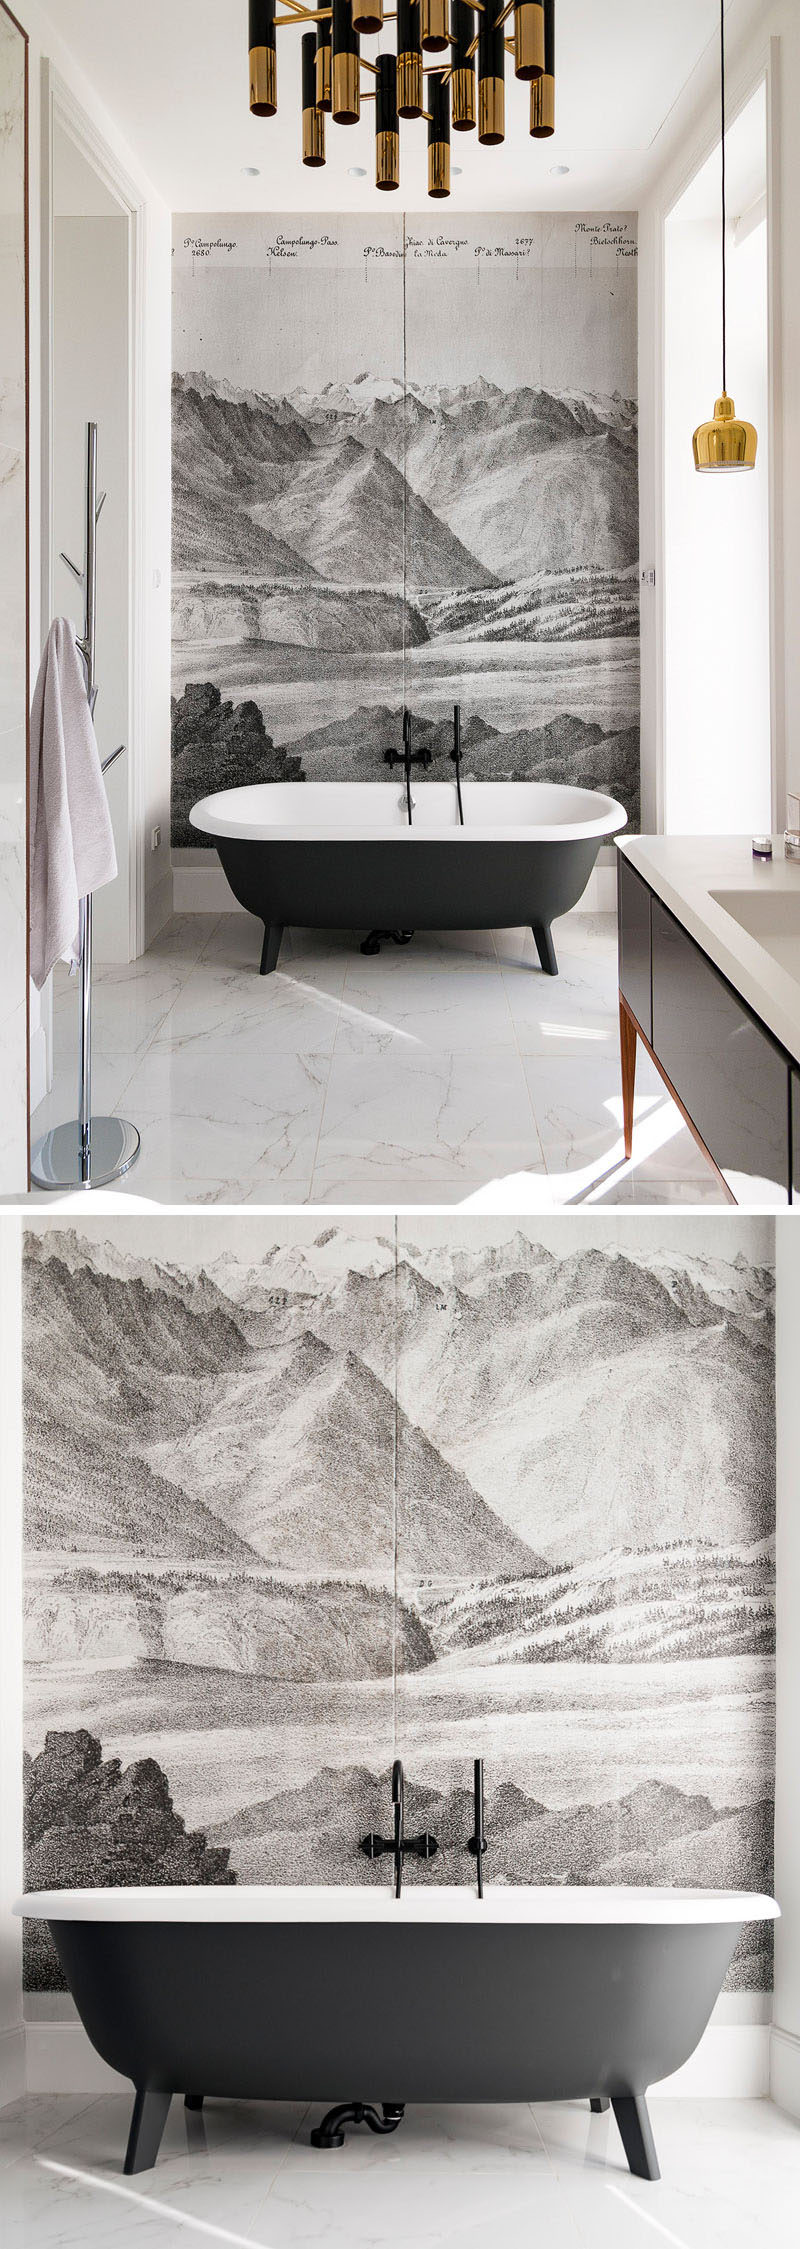 In this bathroom, a mural covers the wall behind the bath creating a focal point in the room. 